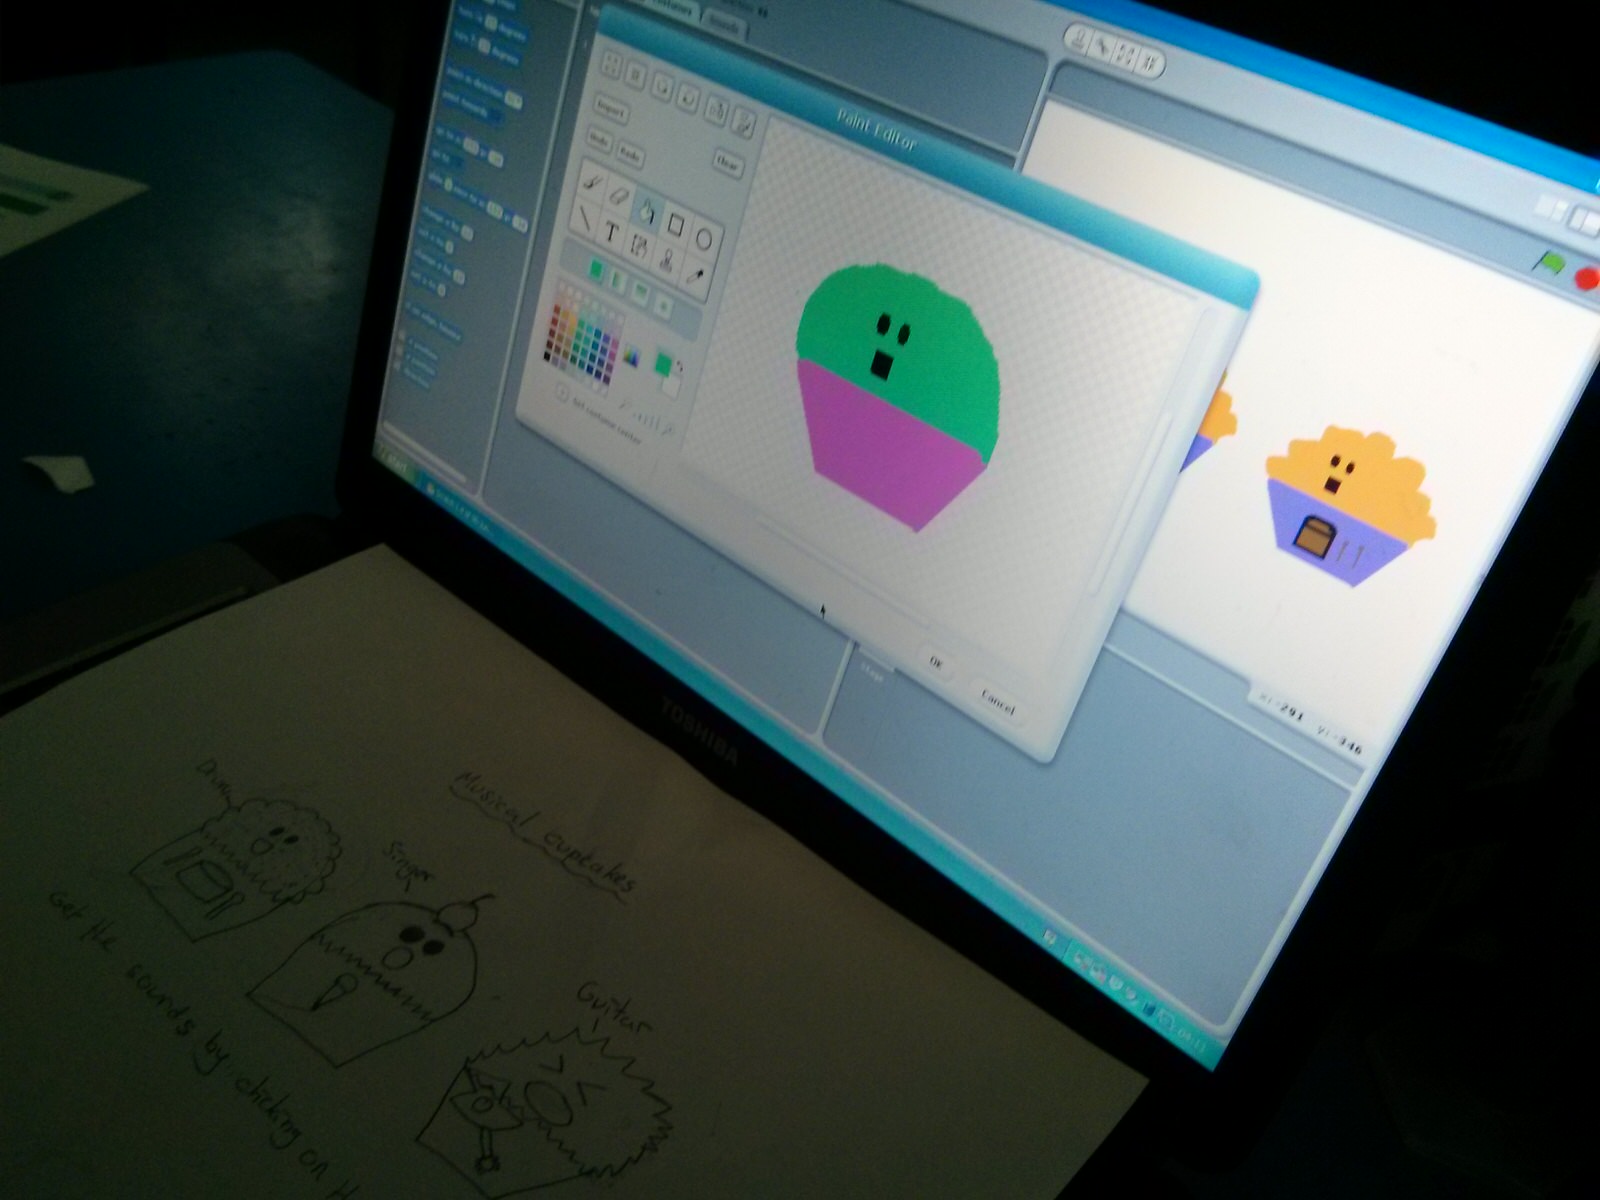 Creating digital characters in Scratch